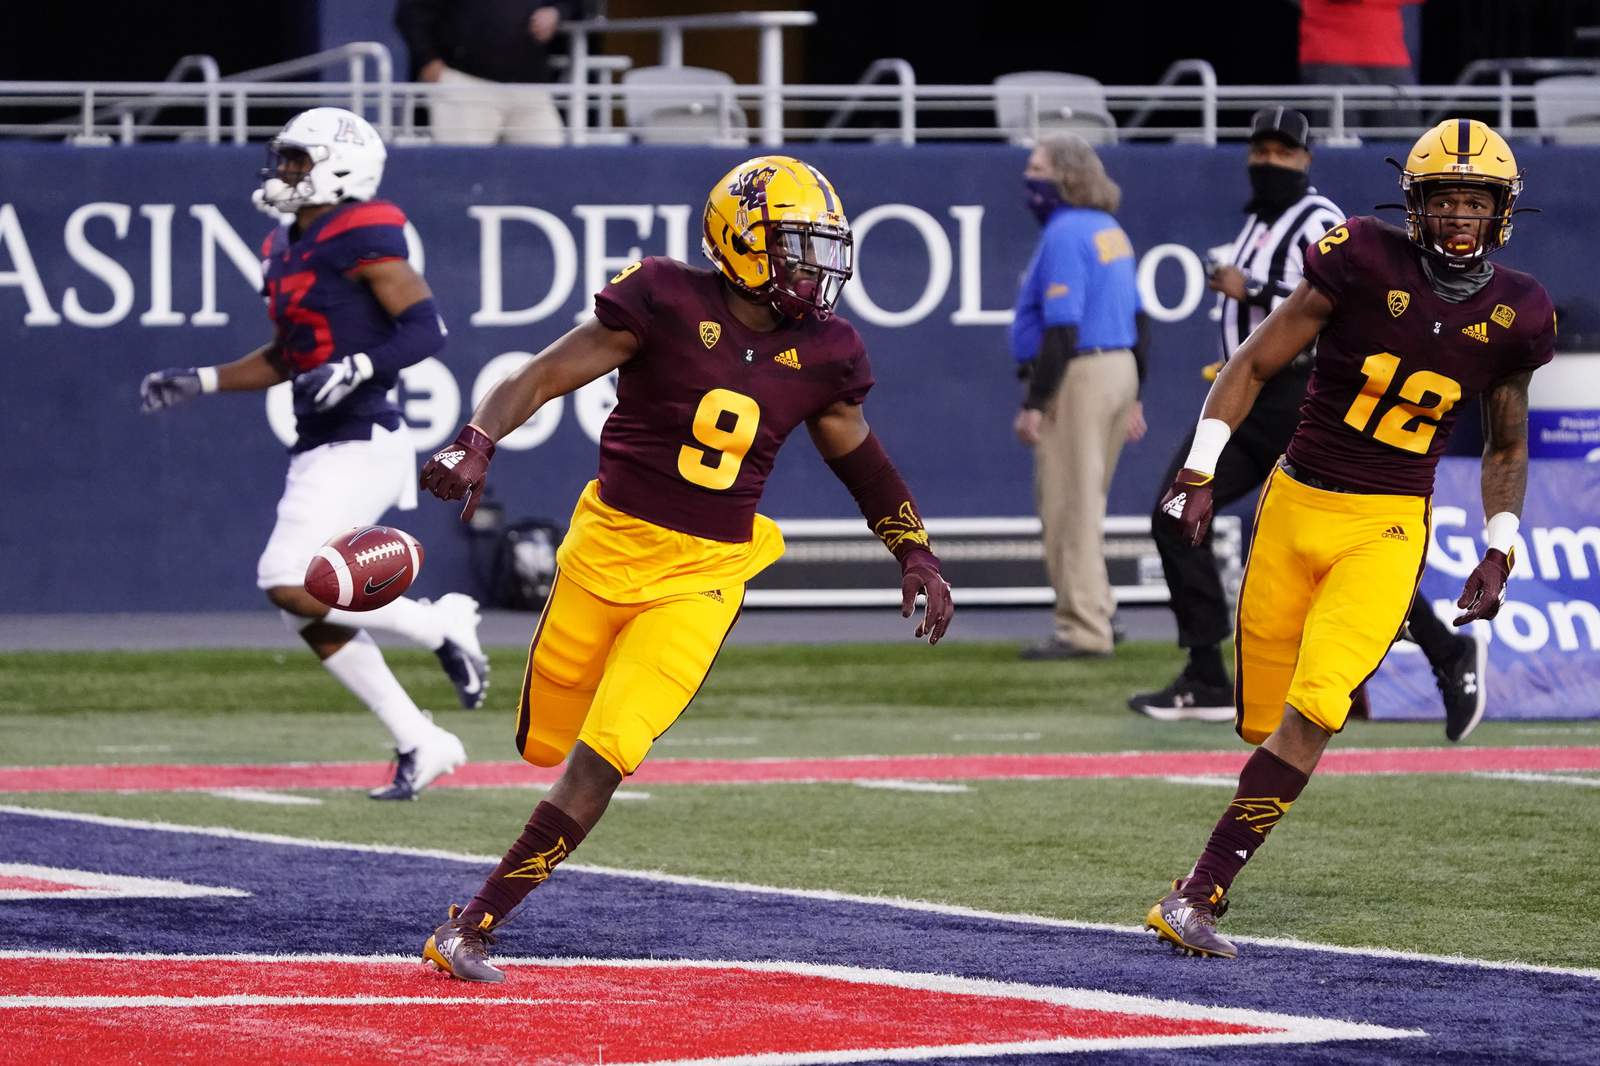 Arizona State Sun Devils Absolutely Dominate the Wildcats to Win, 70-7